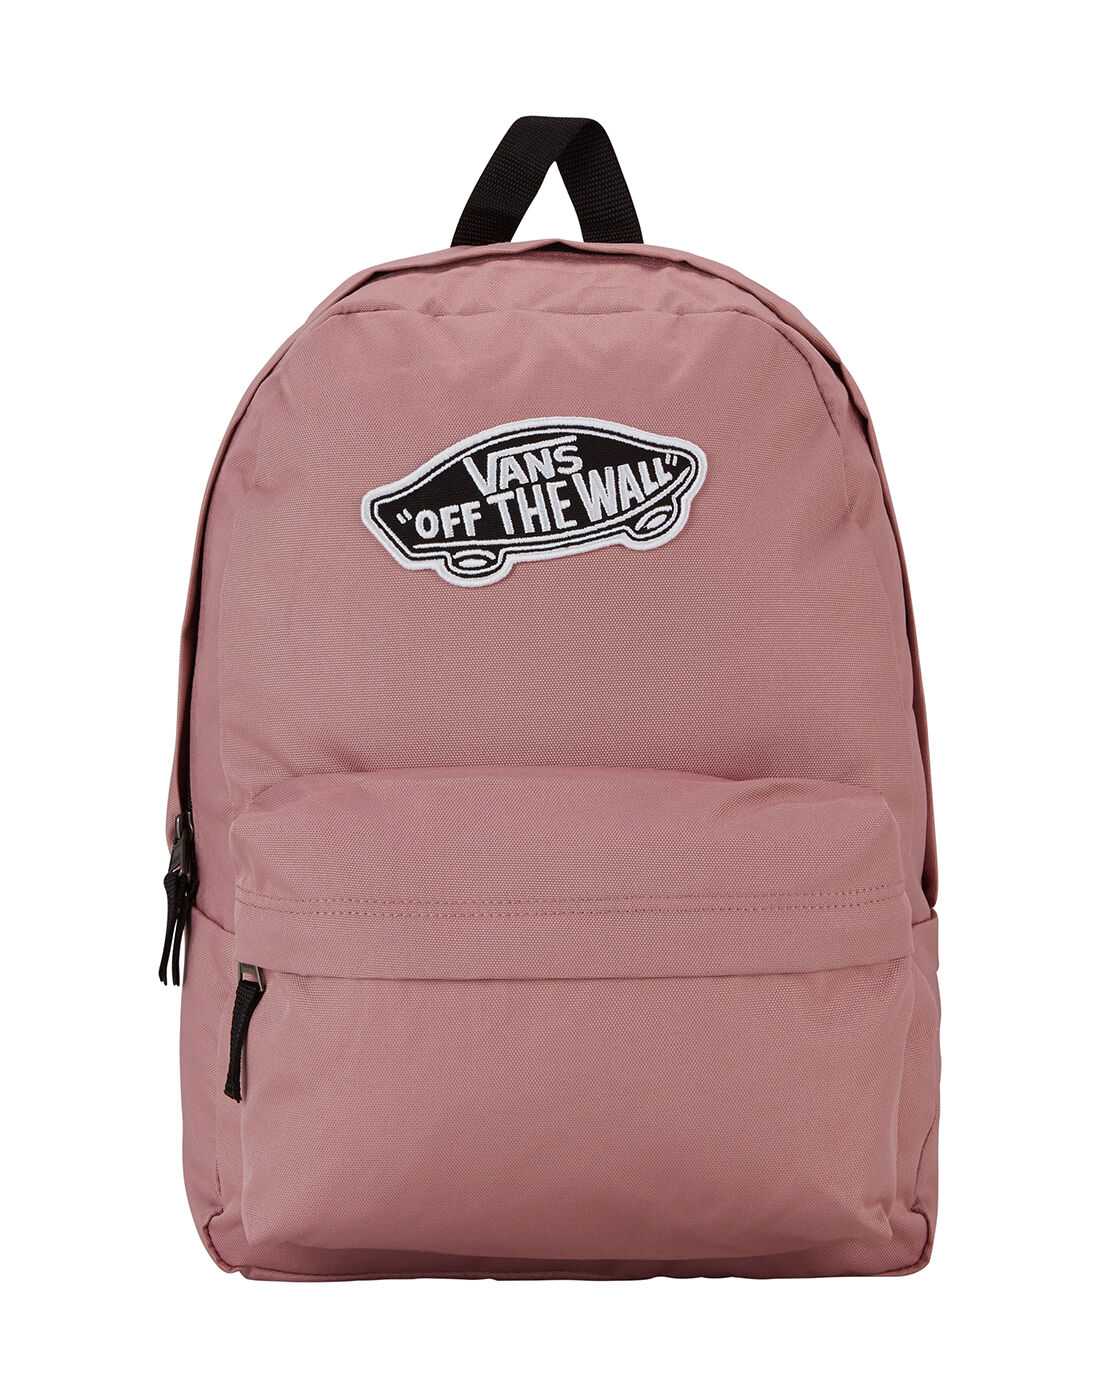 Vans Off The Wall Logo Backpack - Pink 